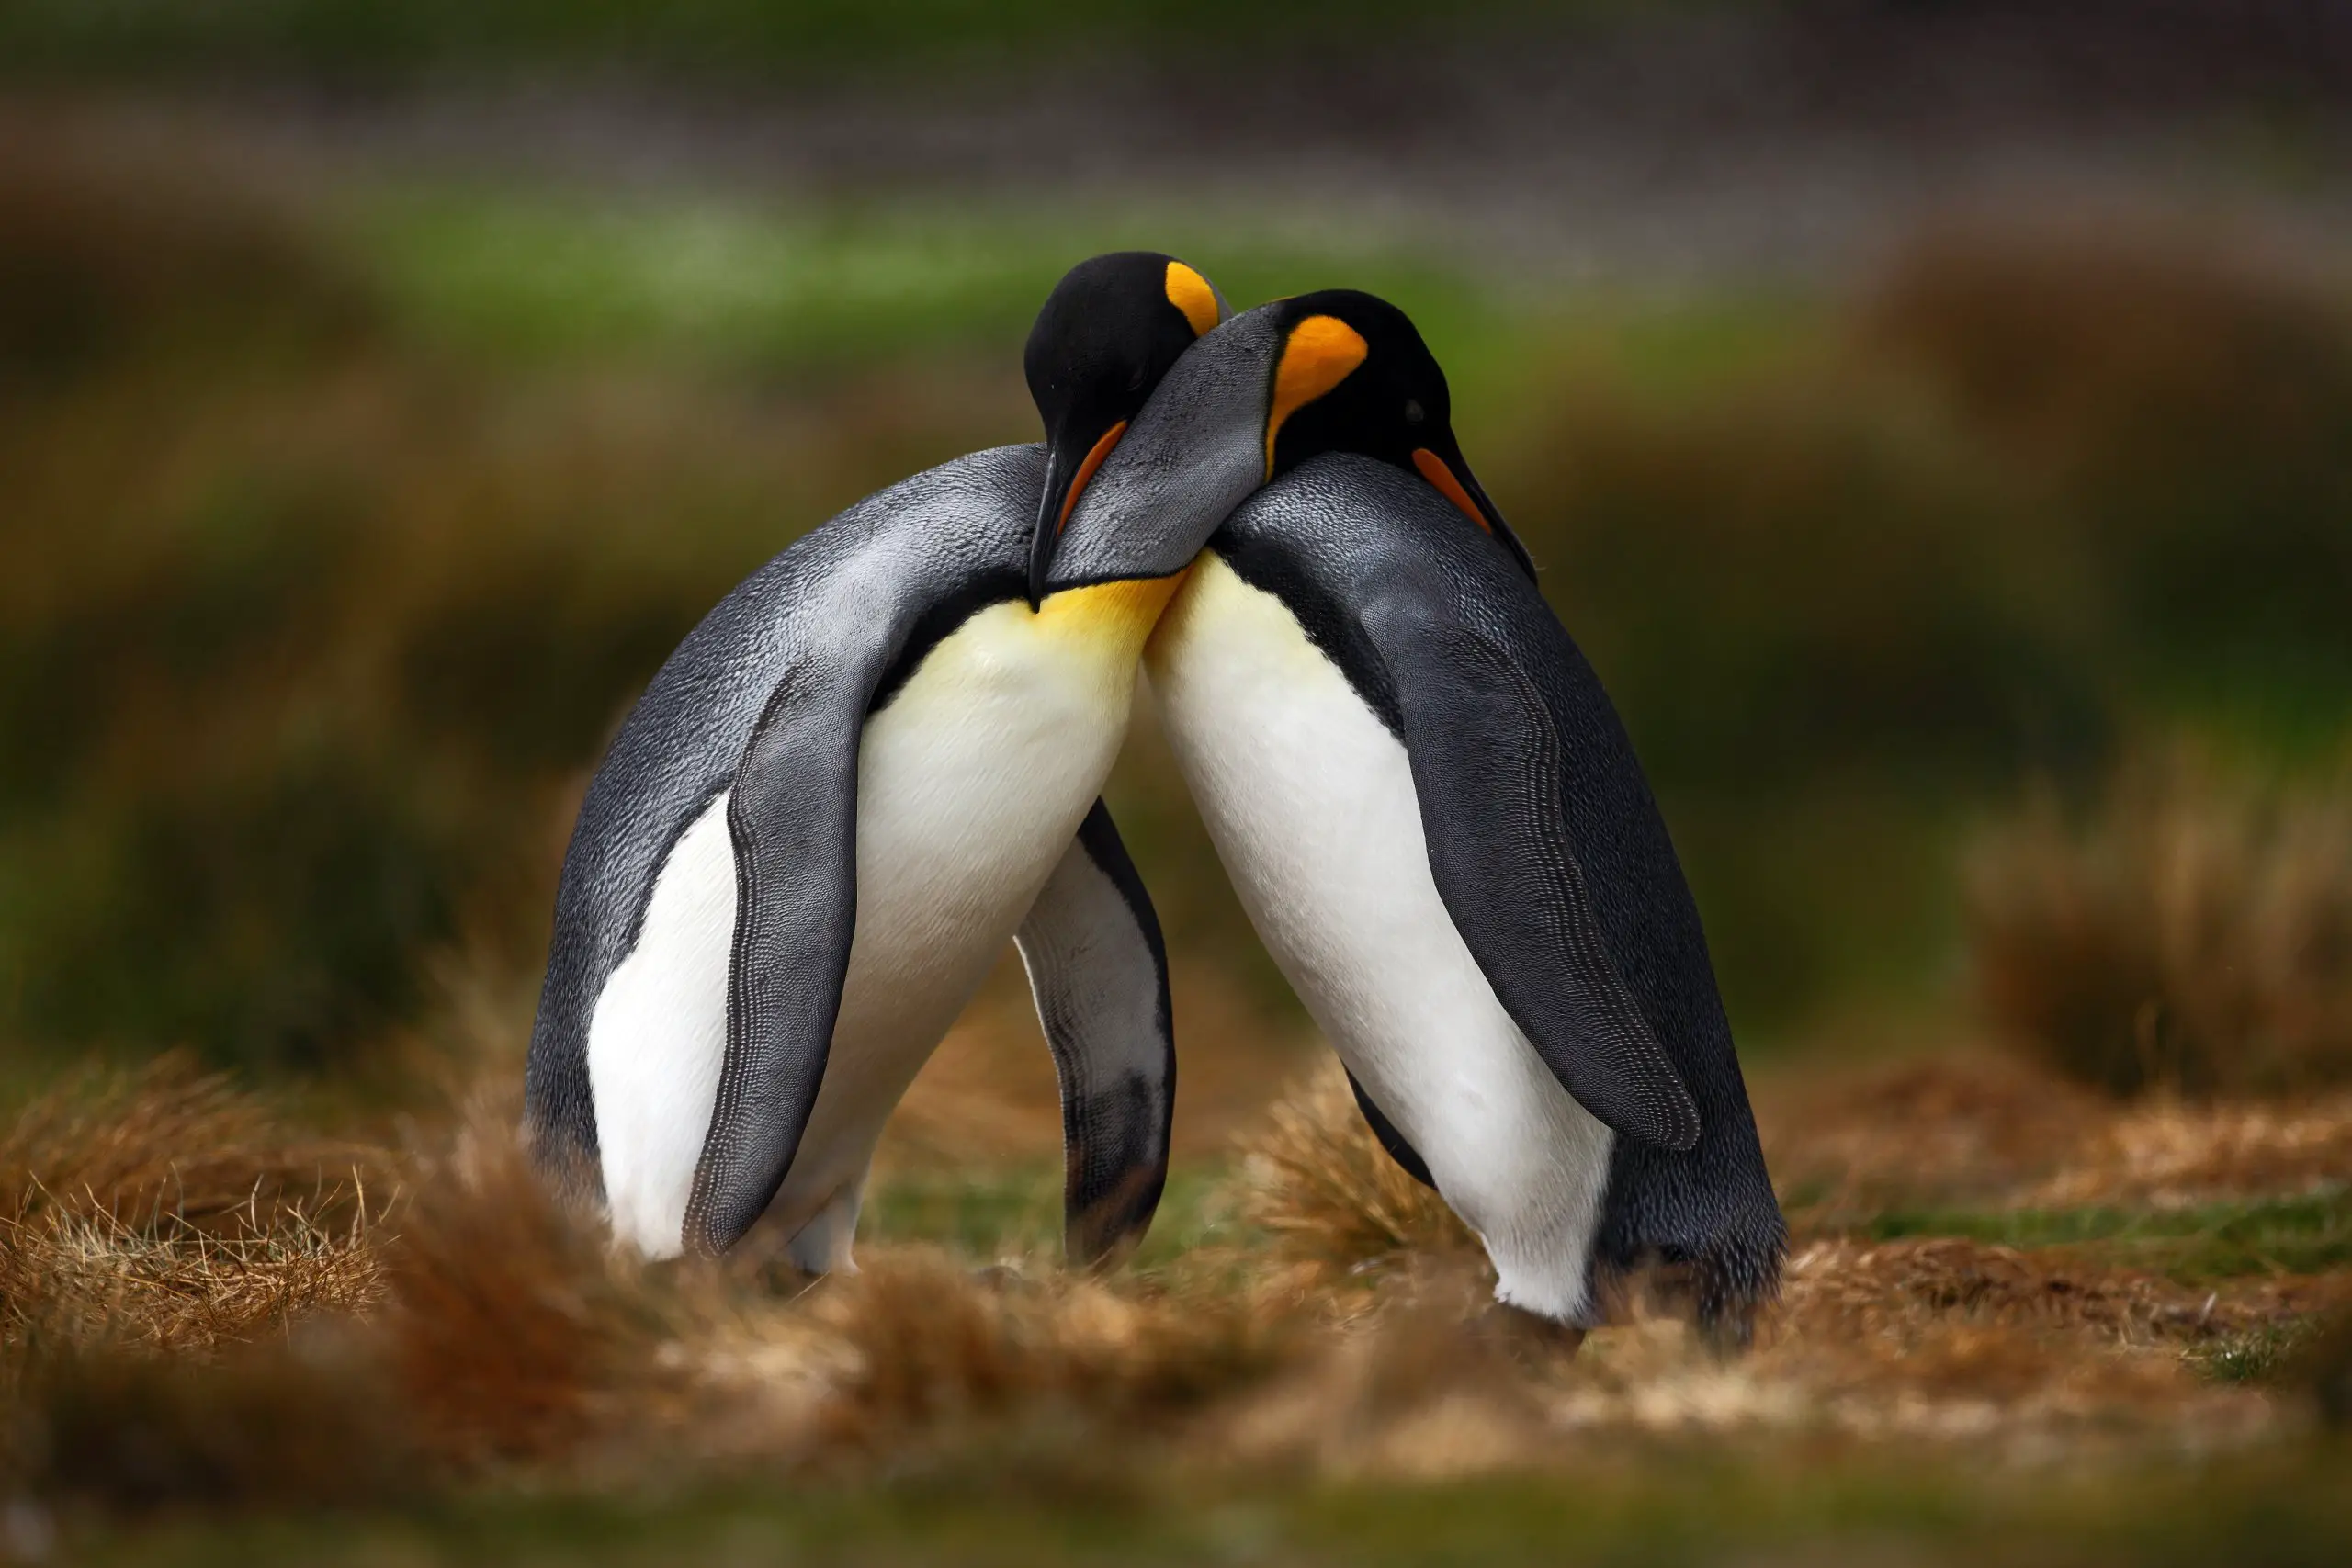 king penguin couple cuddling in wild nature with green background